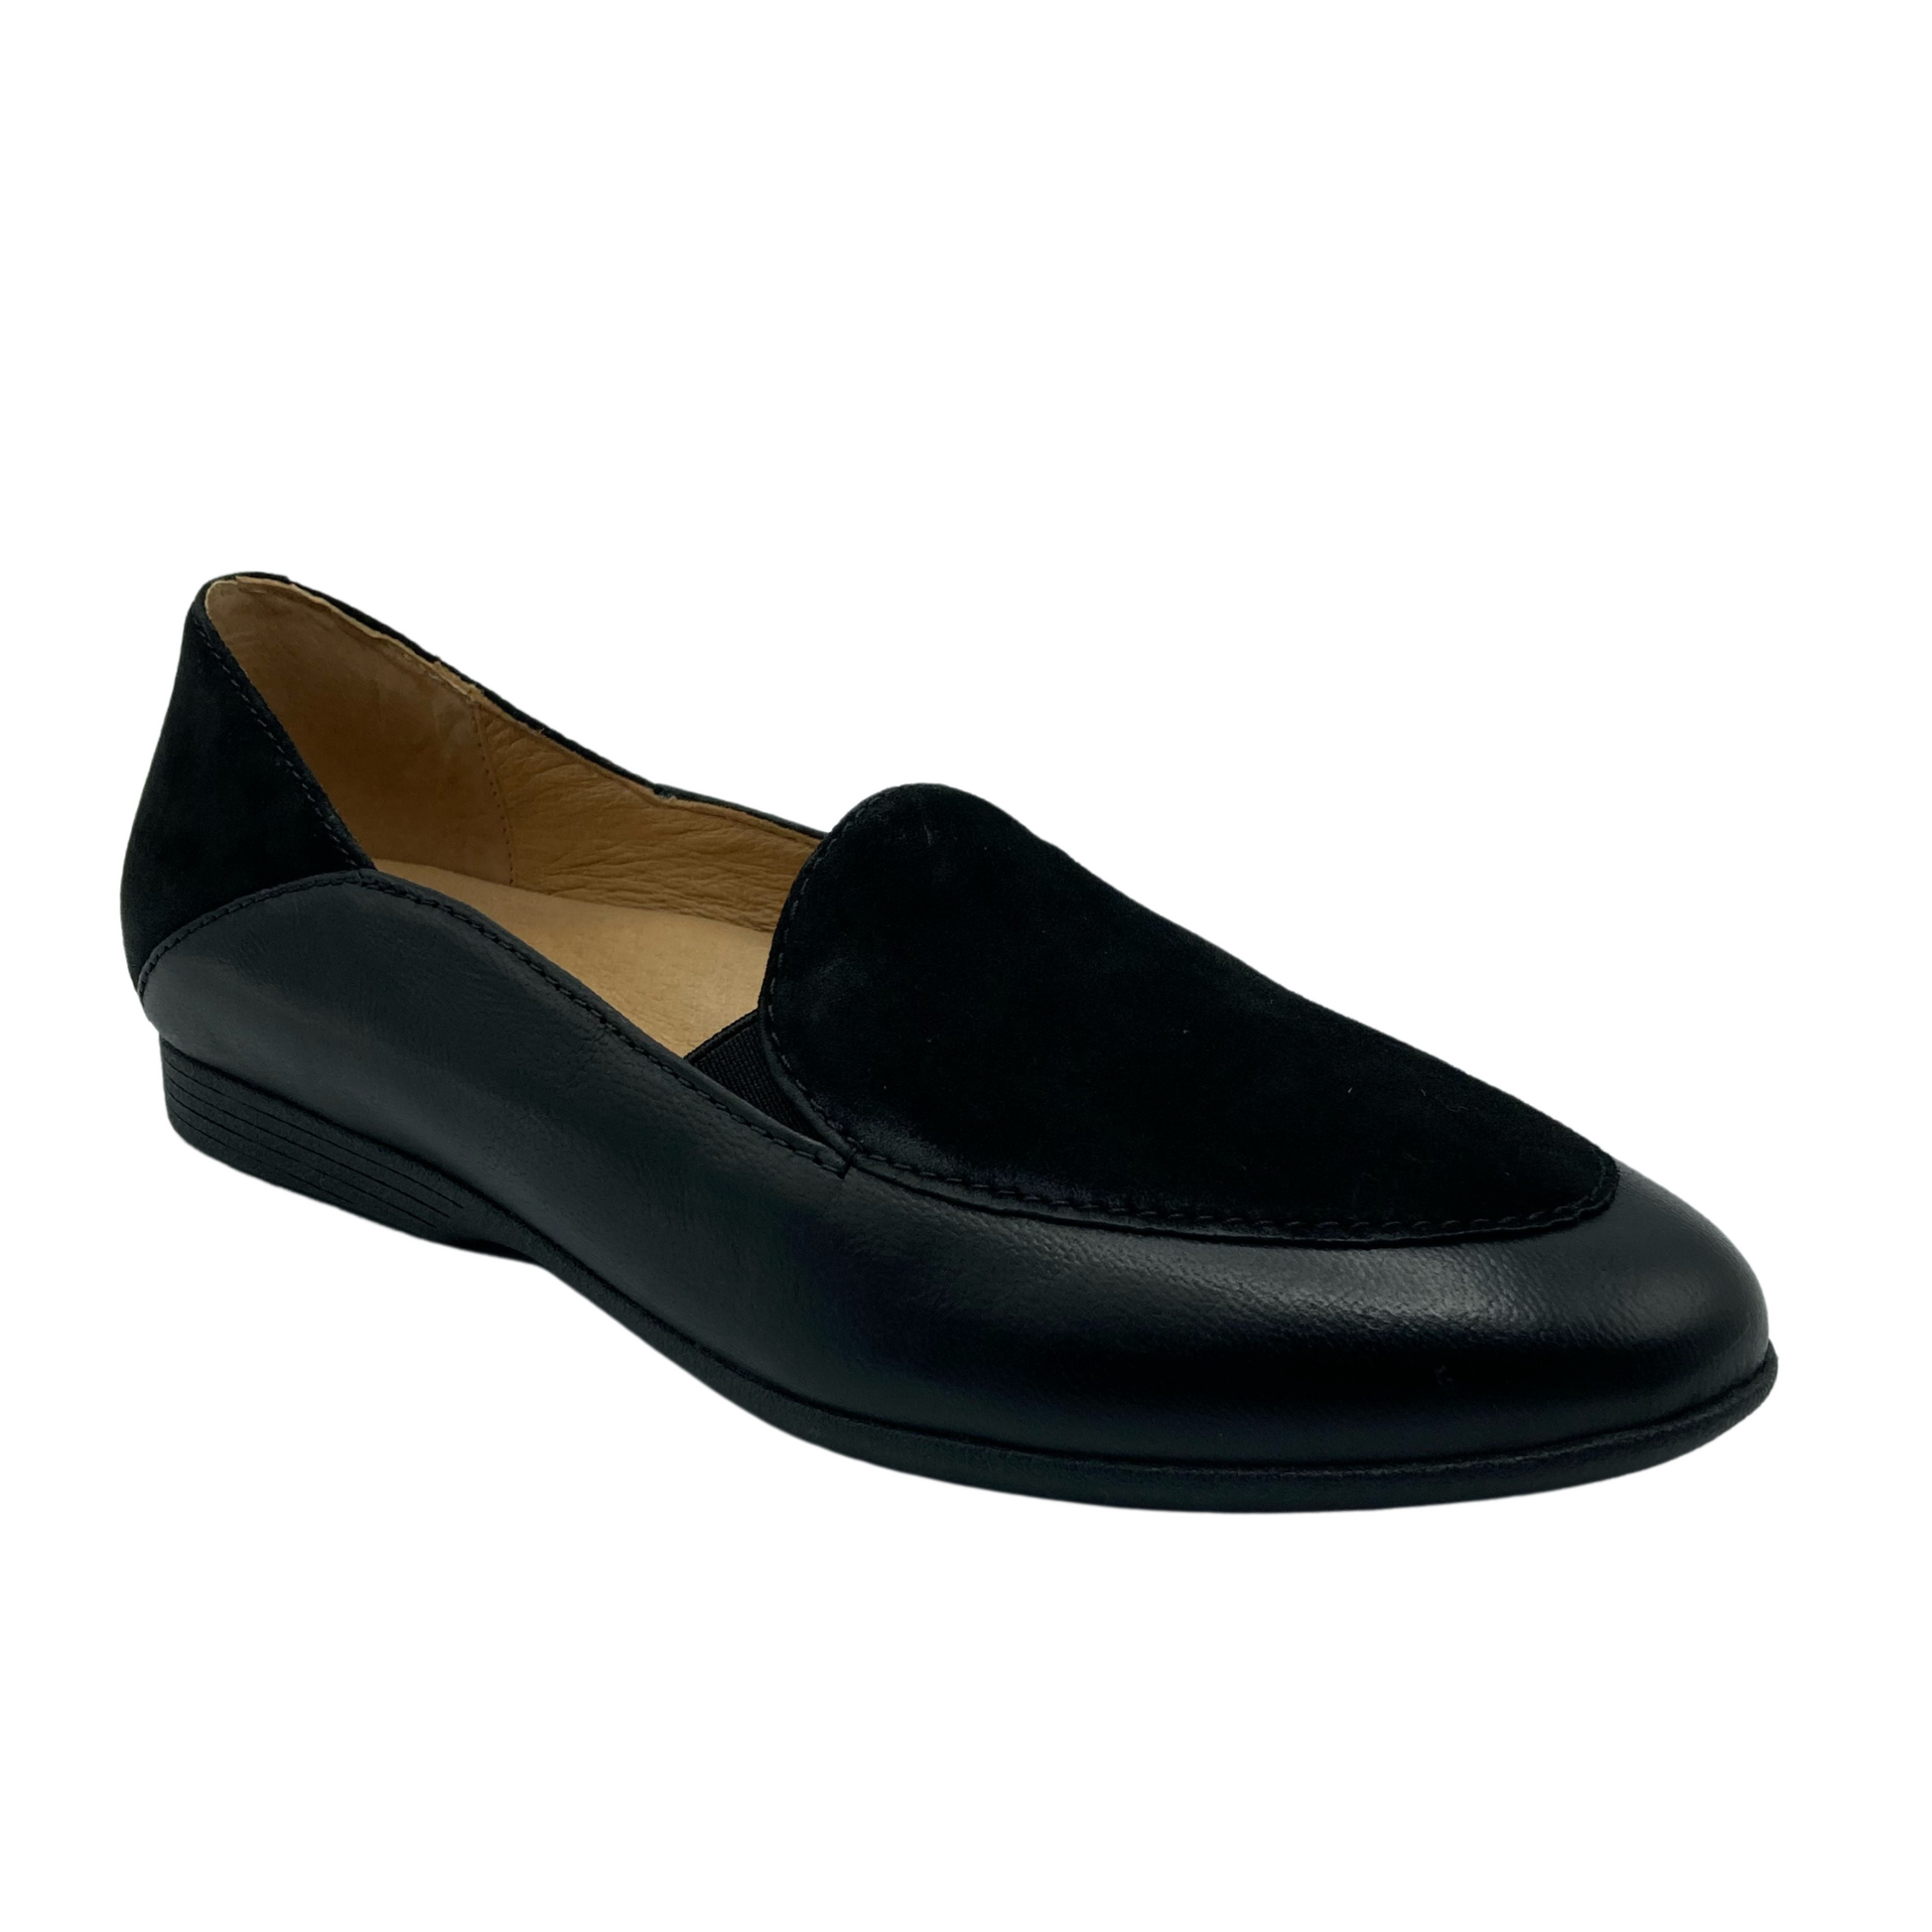 Angled view of black leather moc loafer with tan coloured inside